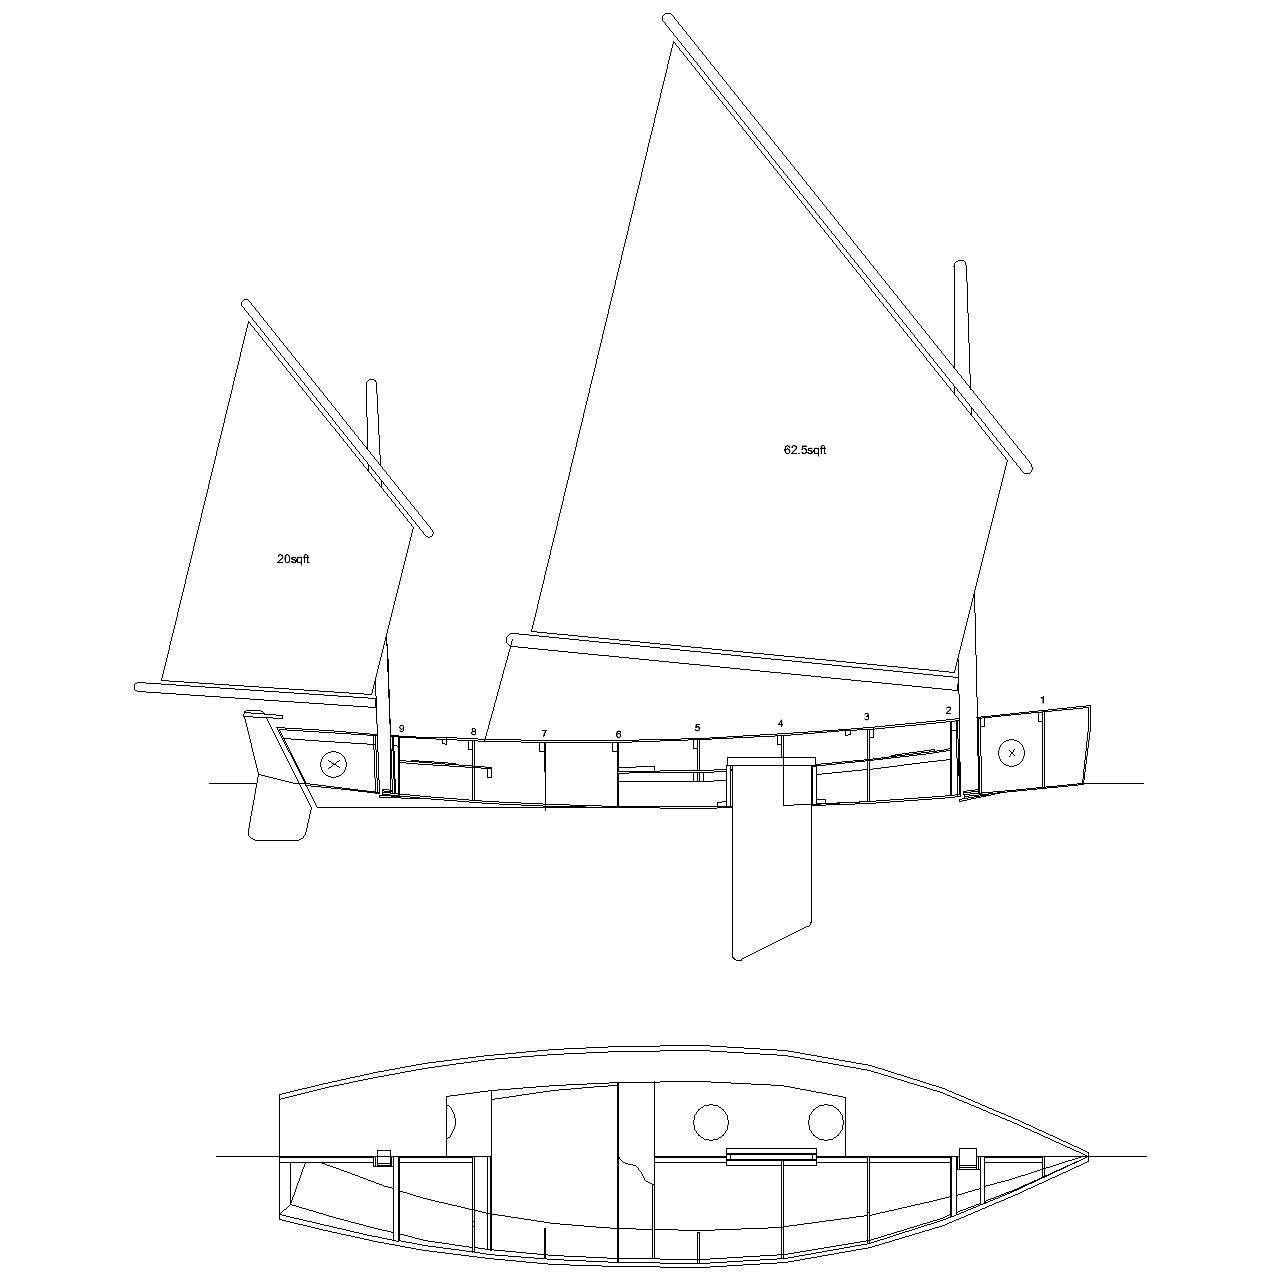 Free Model Row Boat Plans - How To build DIY Woodworking Blueprints PDF Download. - Wood Work